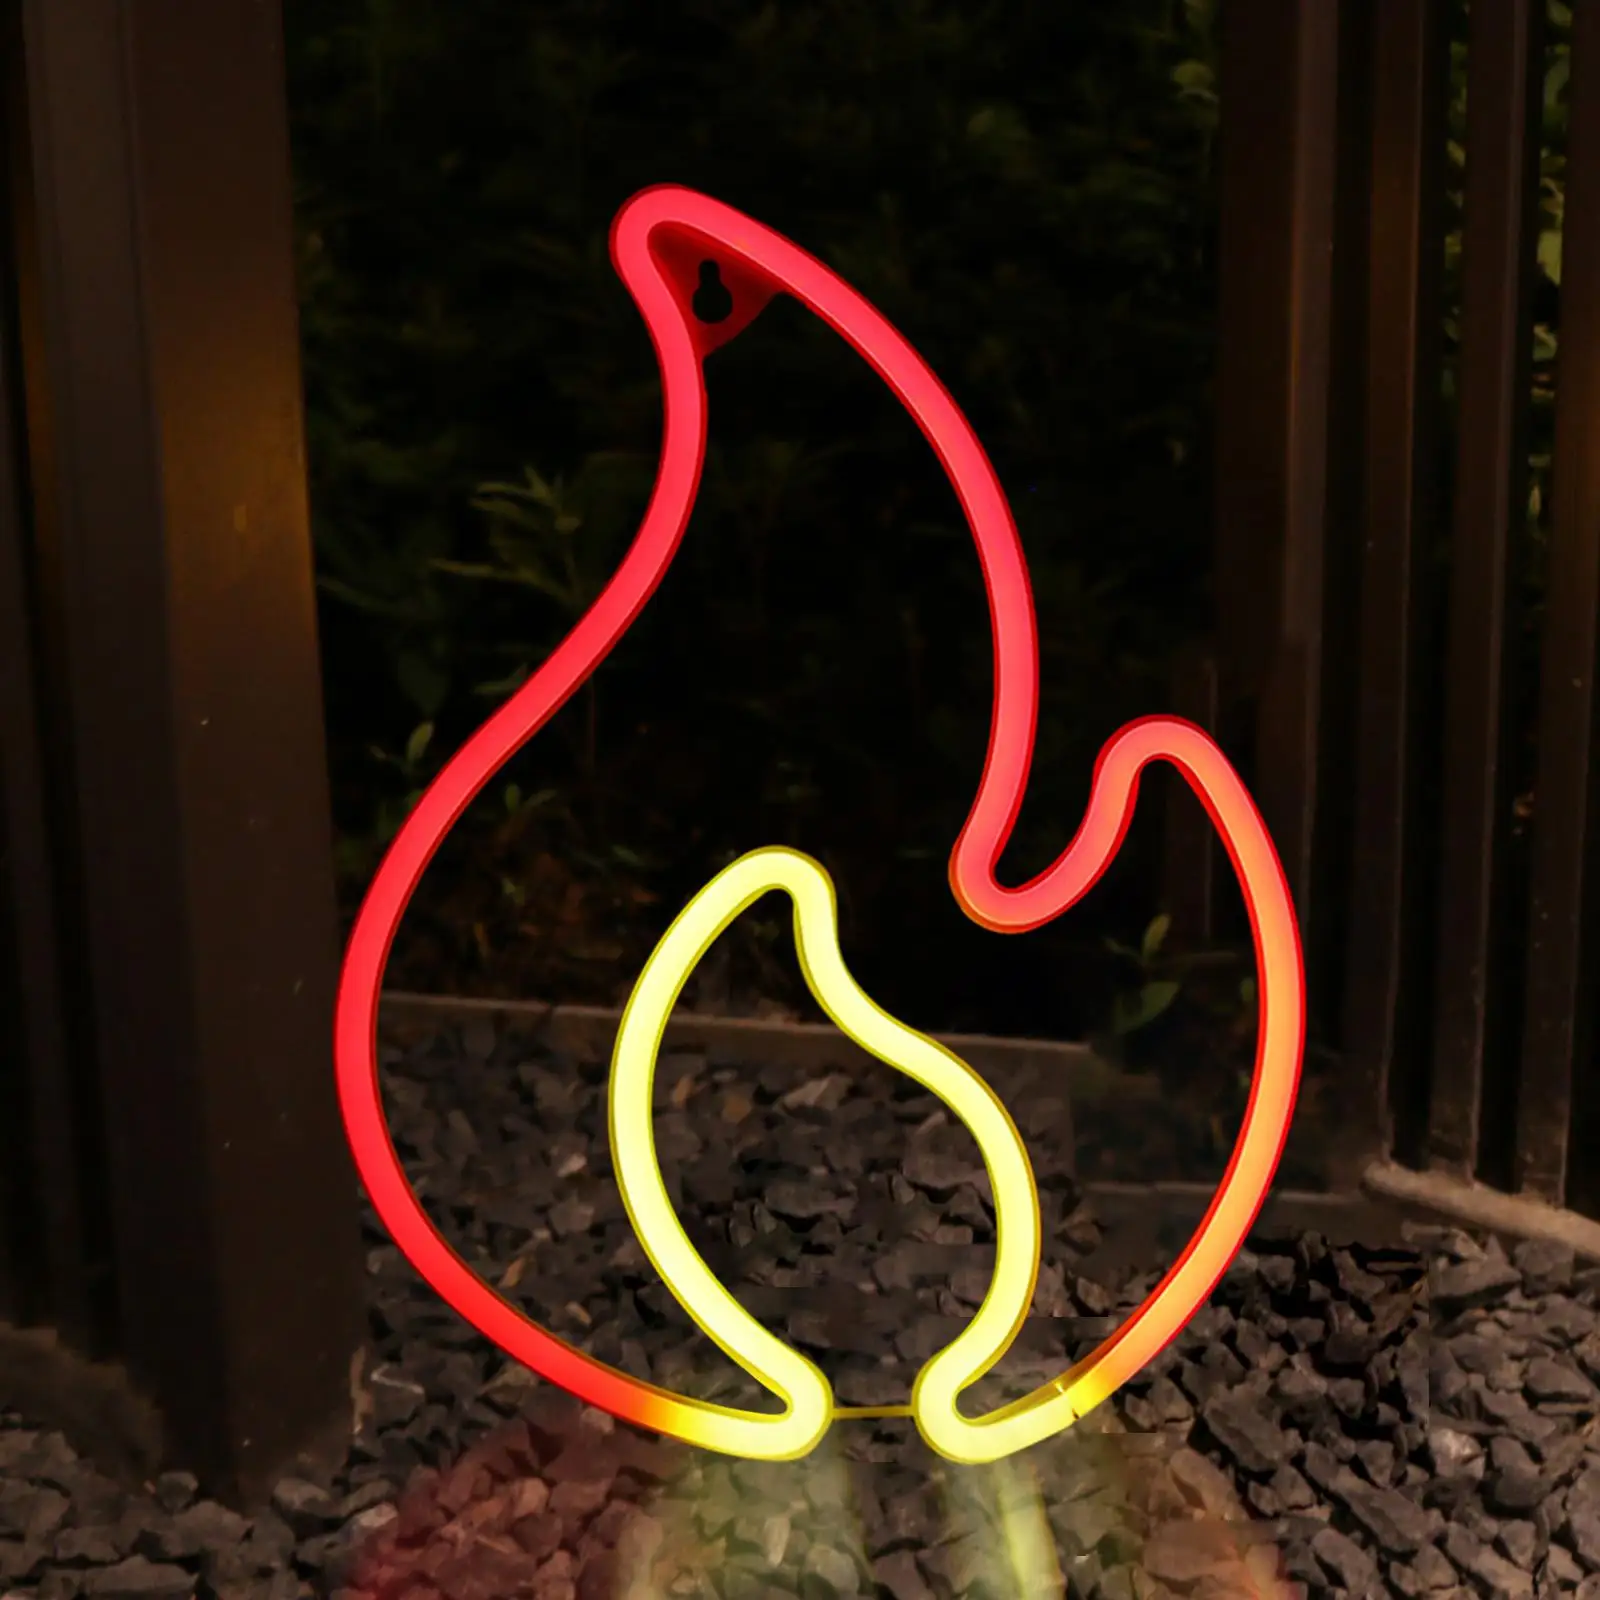 Flame Neon Sign Decor Decorative Neon Light Sign Light up Signs Night Lights for Party Indoor Outdoor Living Room Home